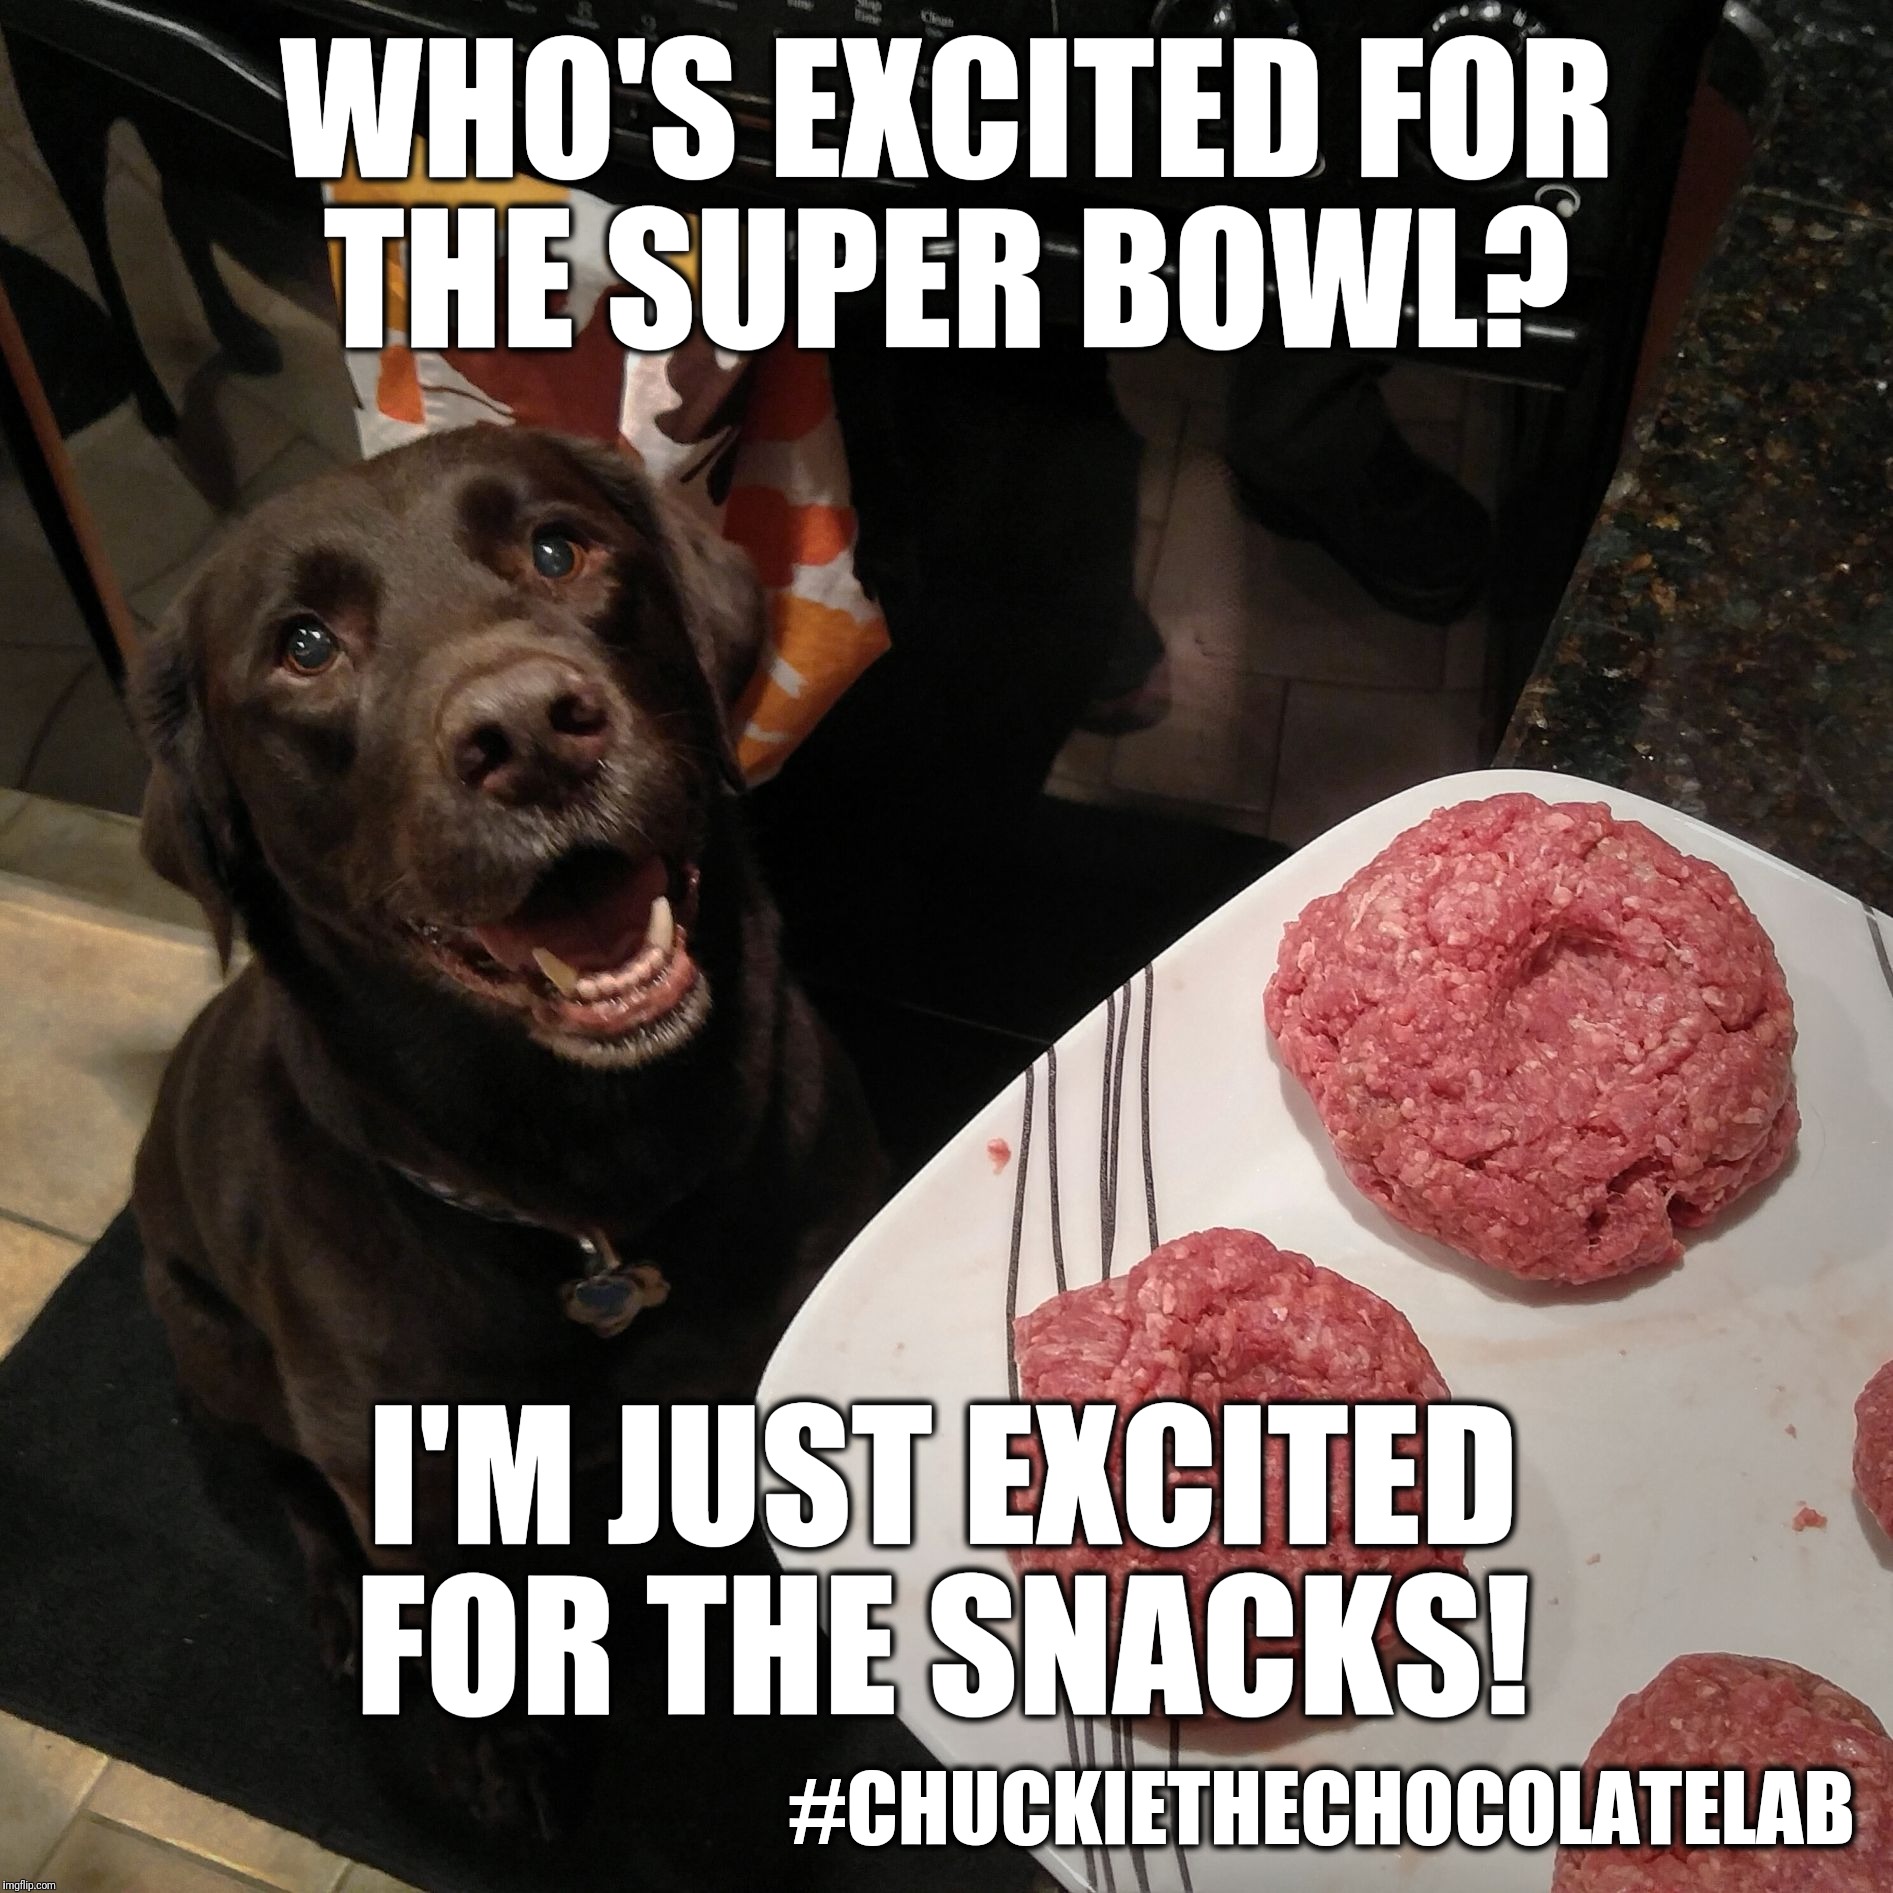 Who's excited for the Super Bowl?  | WHO'S EXCITED FOR THE SUPER BOWL? I'M JUST EXCITED FOR THE SNACKS! #CHUCKIETHECHOCOLATELAB | image tagged in chuckie the chocolate lab,super bowl,football,memes,snacks,dogs | made w/ Imgflip meme maker